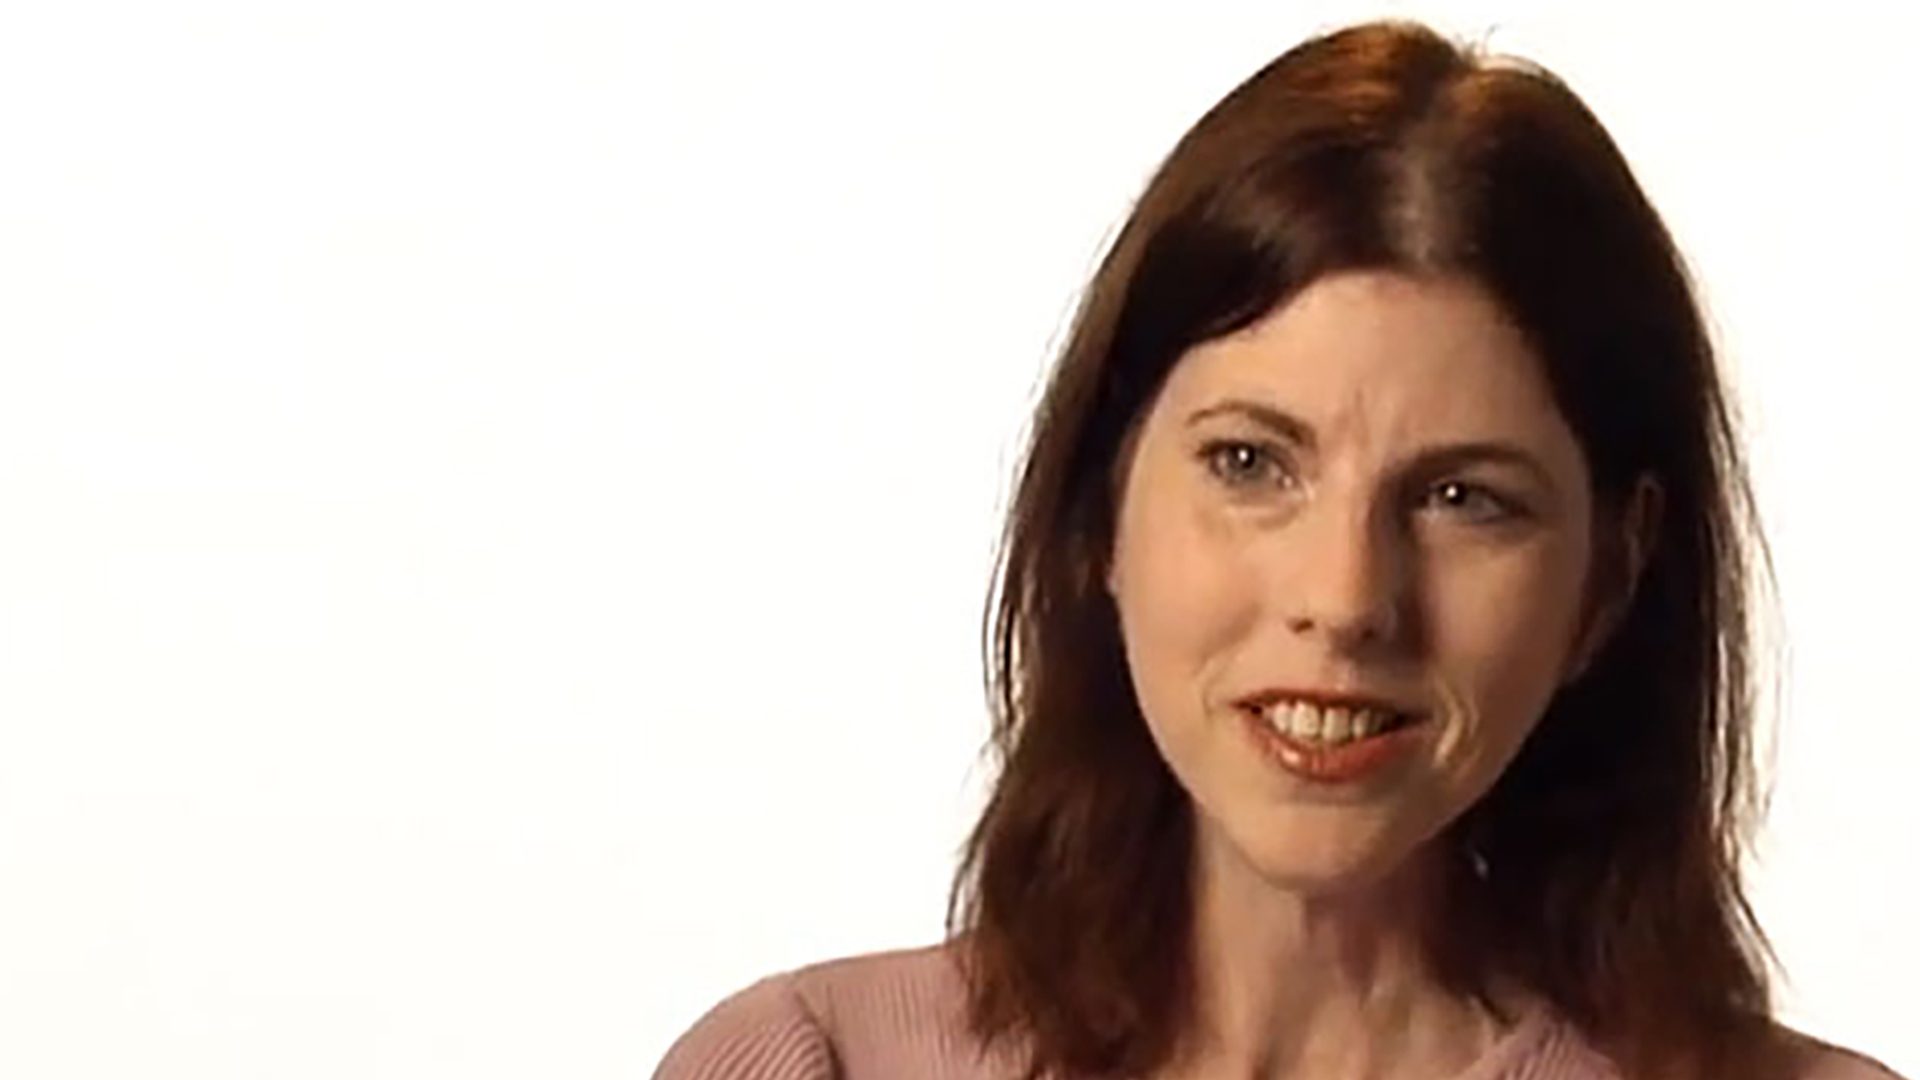 An adult woman with shoulder-length brown hair wears a pink shirt and is interviewed against a white background.